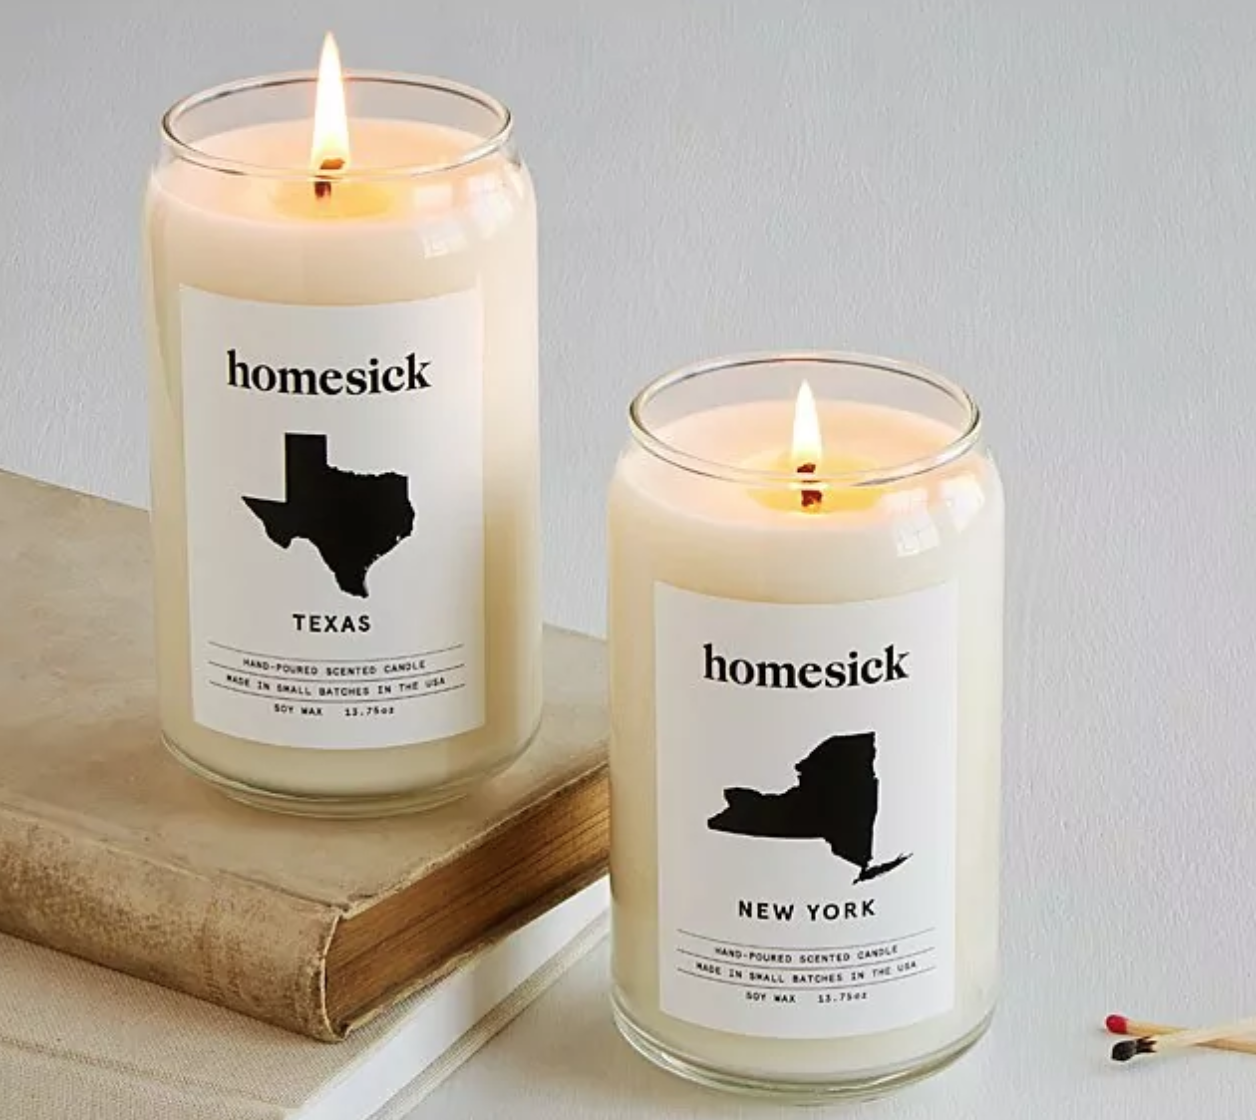 Homesick Candle Graduation Gift Ideas for Friends